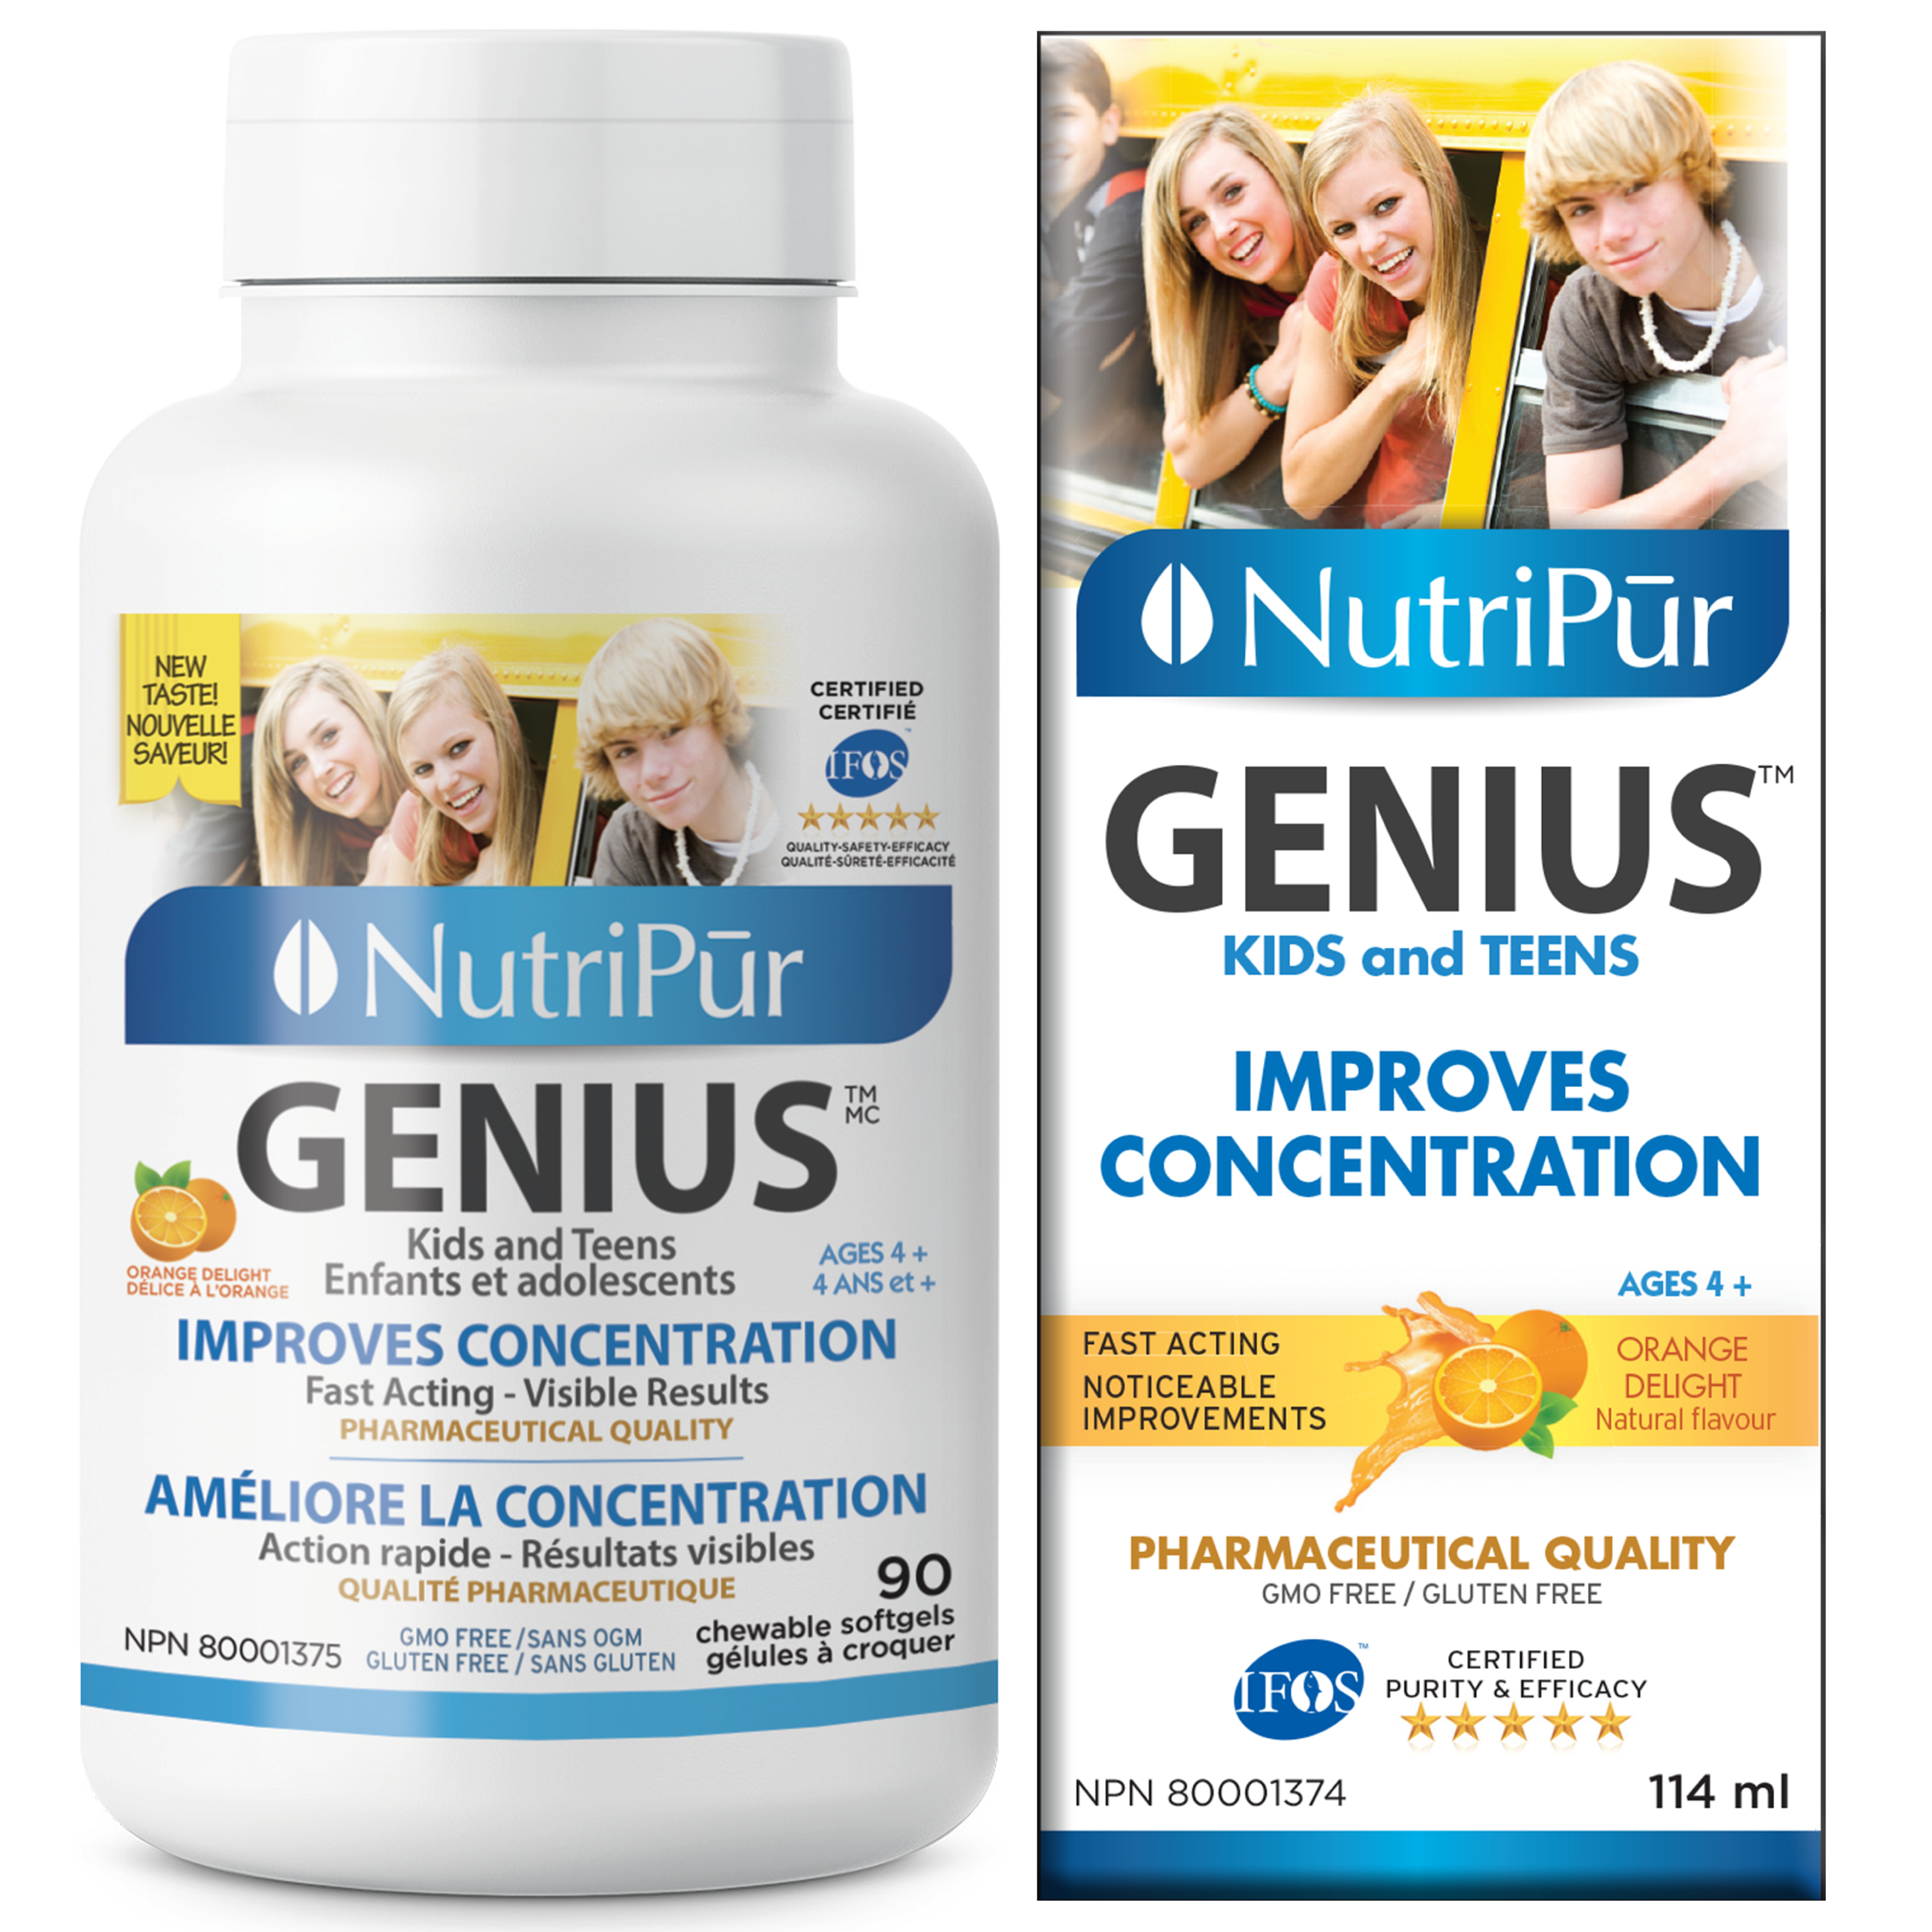 Nutripur GENIUS Kids & Teens - Attention Deficit Disorder/Hyperactivity (ADD/ADHD), school performance, concentration, memory, anxiety, insomnia, Difficulty with reading and writing. - Ebambu.ca natural health product store - free shipping <59$ 